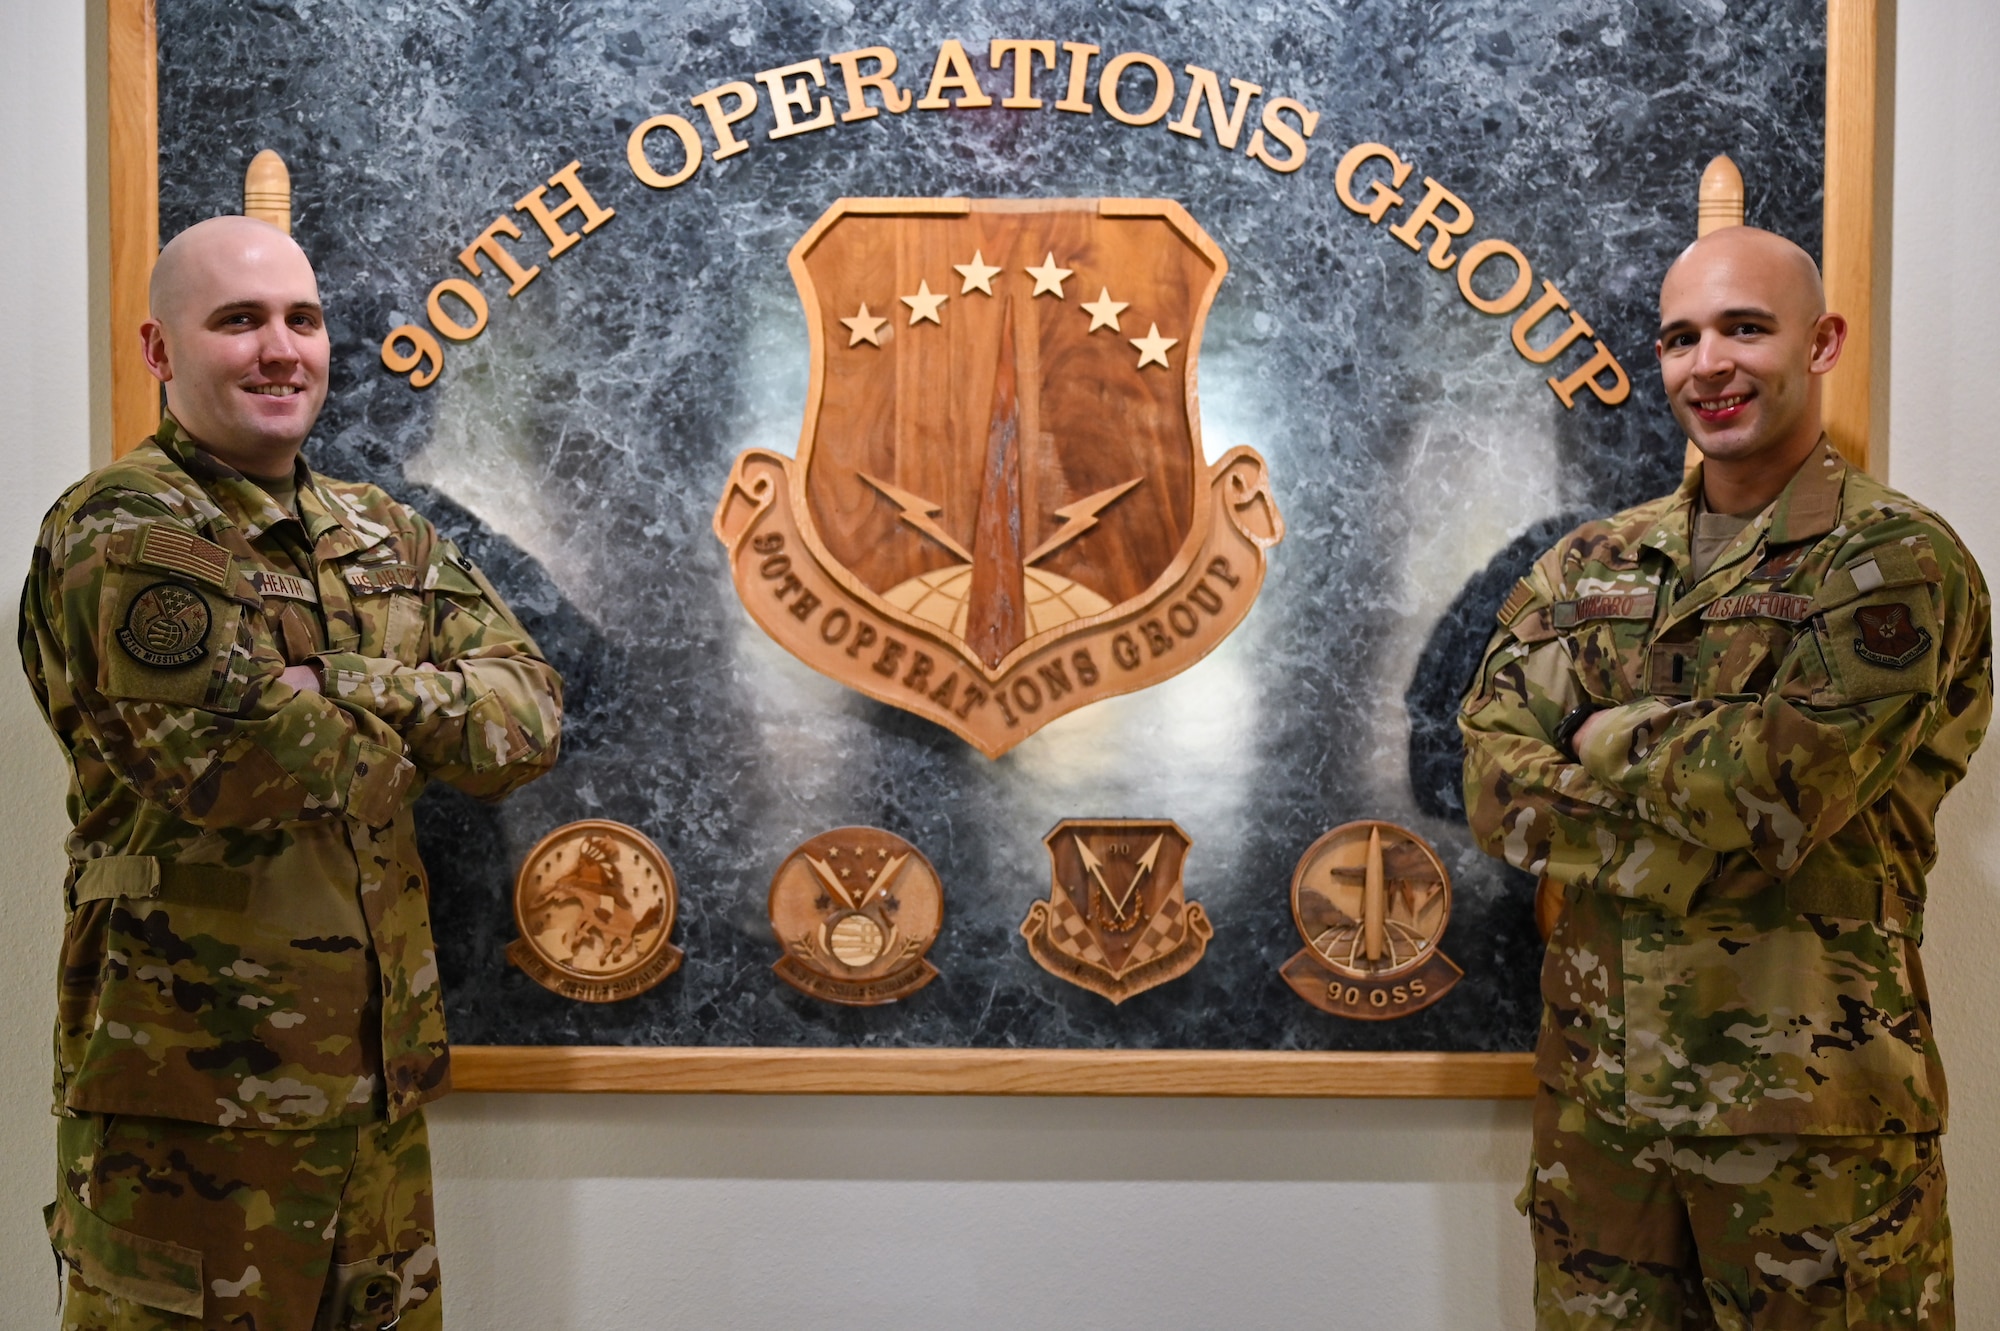 Capt. Christian Heath and 1st Lt. Juan Navarro, 321st Missile Squadron combat crew, pose in front of the 90th Operations Group emblem on F.E. Warren Air Force Base, Wyoming, June 17, 2021. The Air Force Association awarded Heath and Navarro the 2020 Gen. Thomas S. Power Outstanding Missile Crew Award. (U.S. Air Force photo by Joseph Coslett)